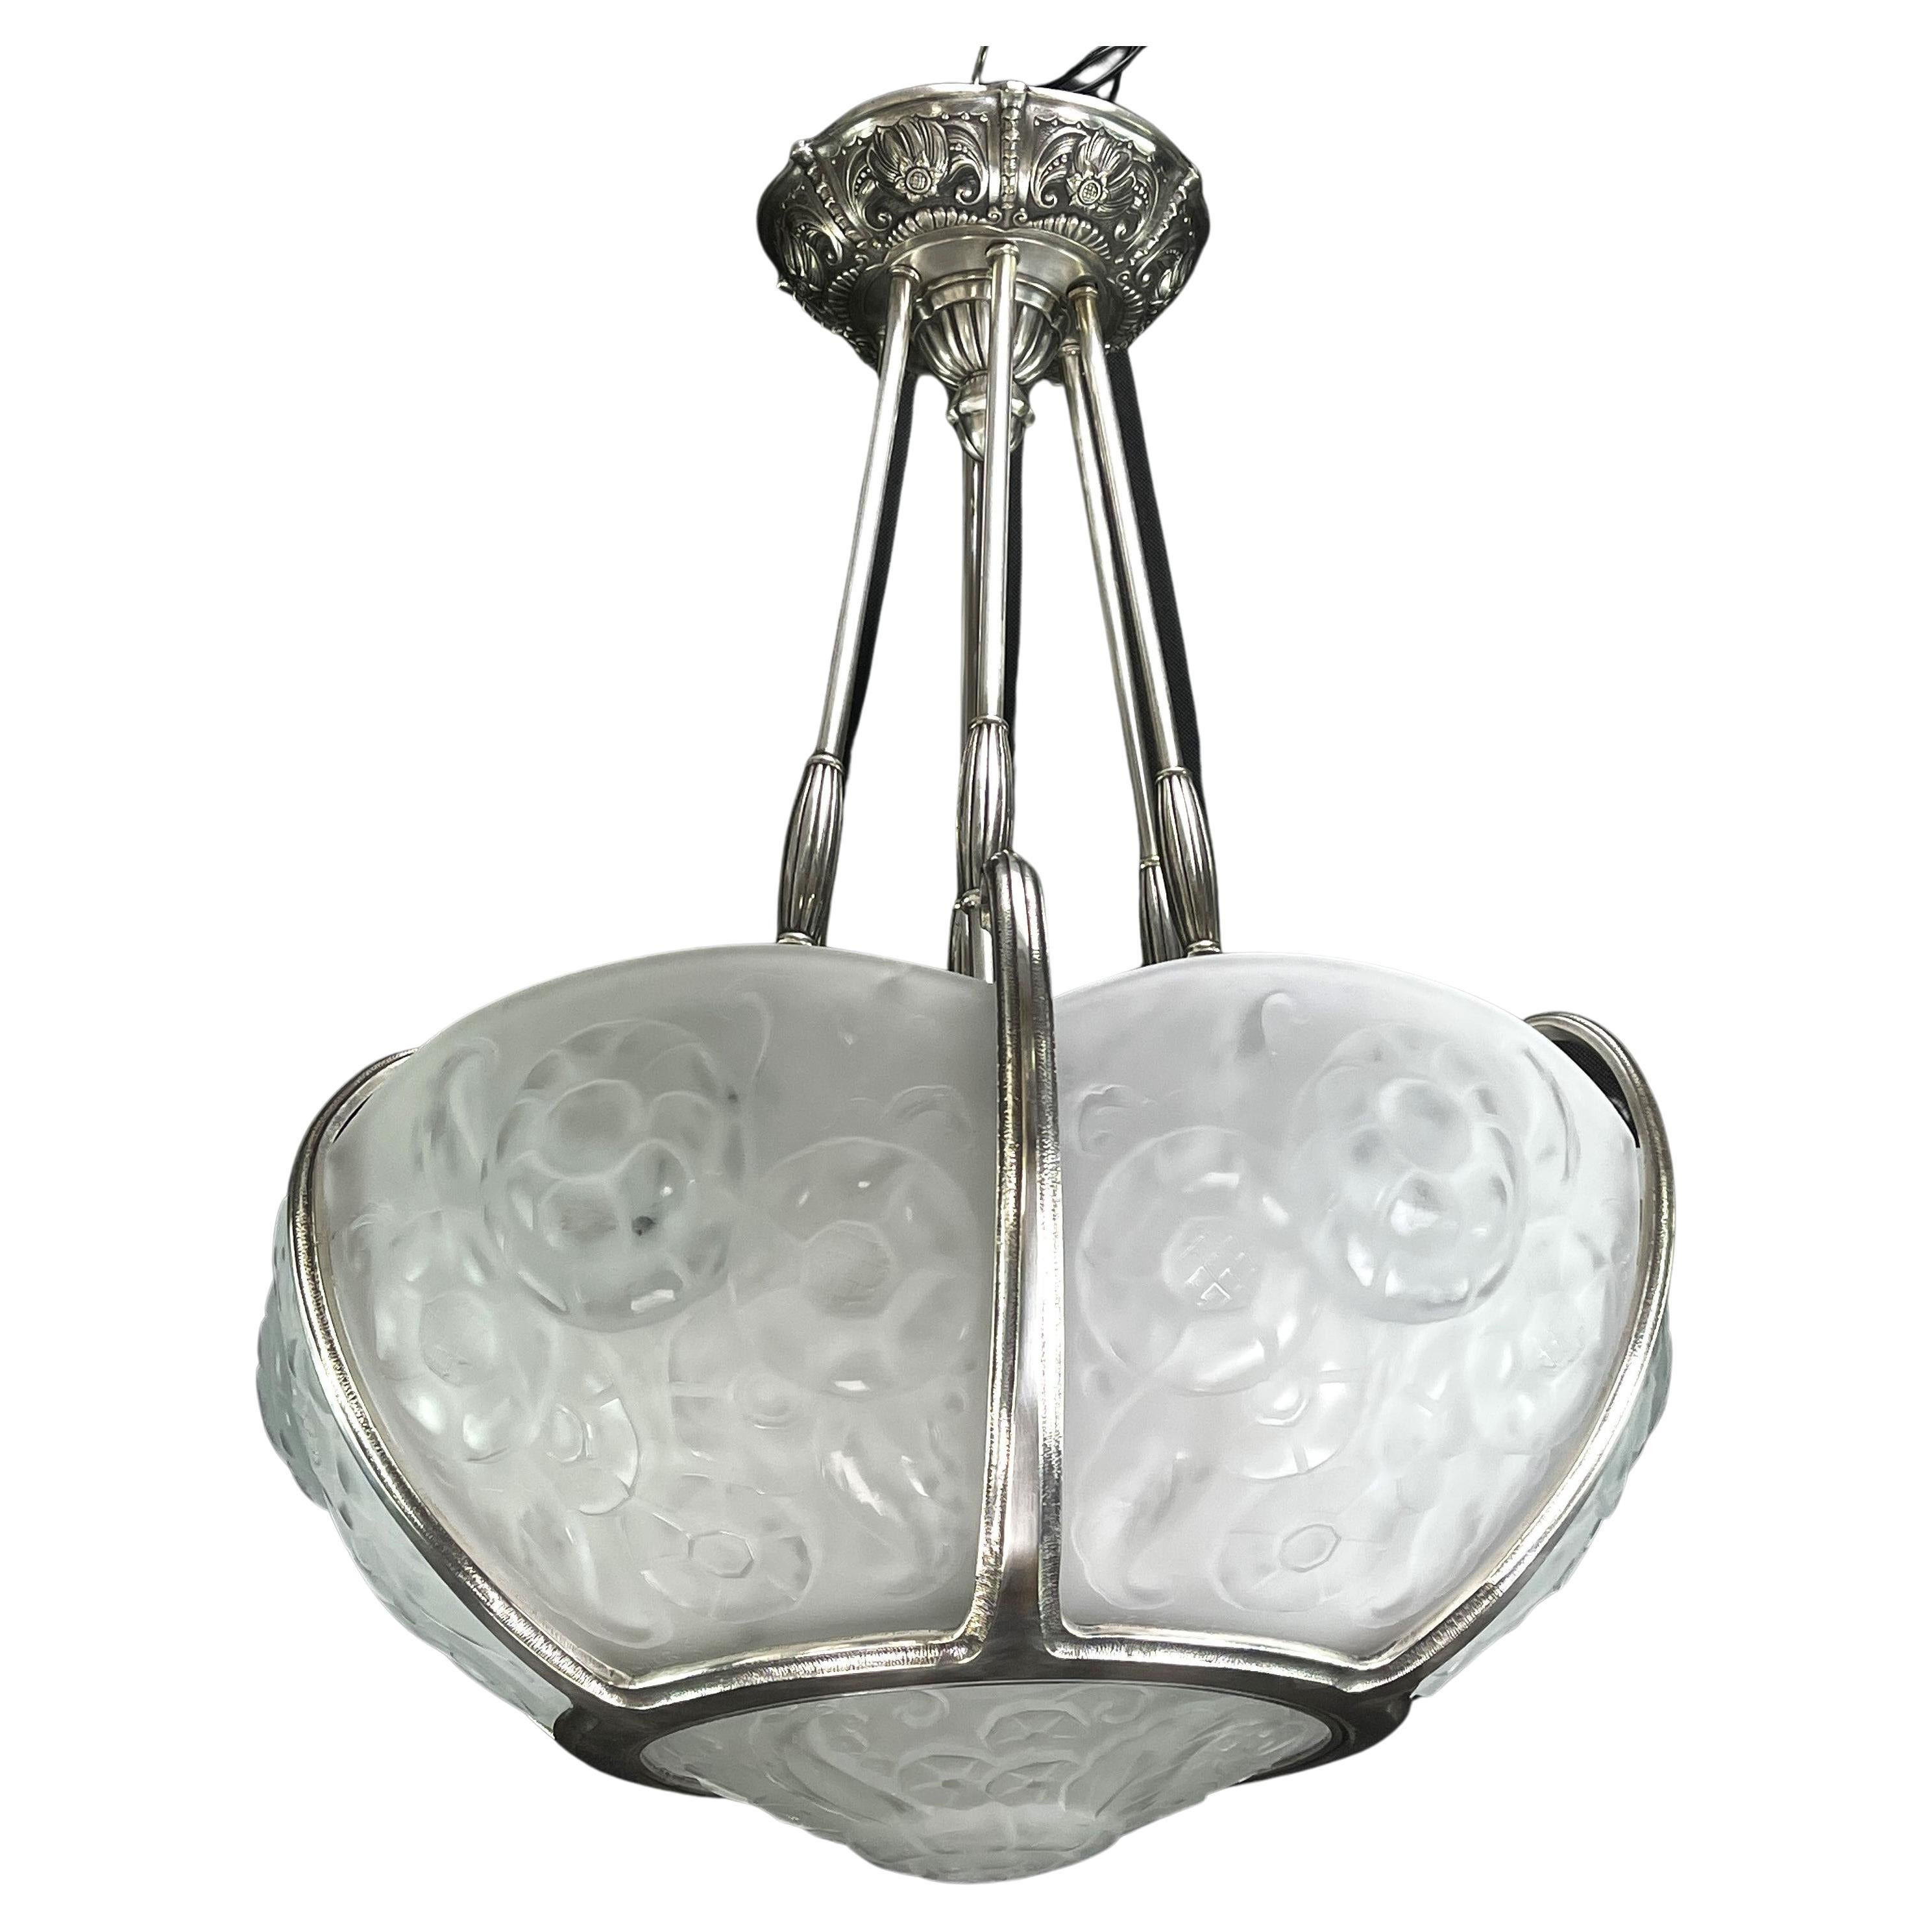 Art Deco Chandelier by Muller Freres, Luneville, Nickel-Plated, 1920s/1930s For Sale